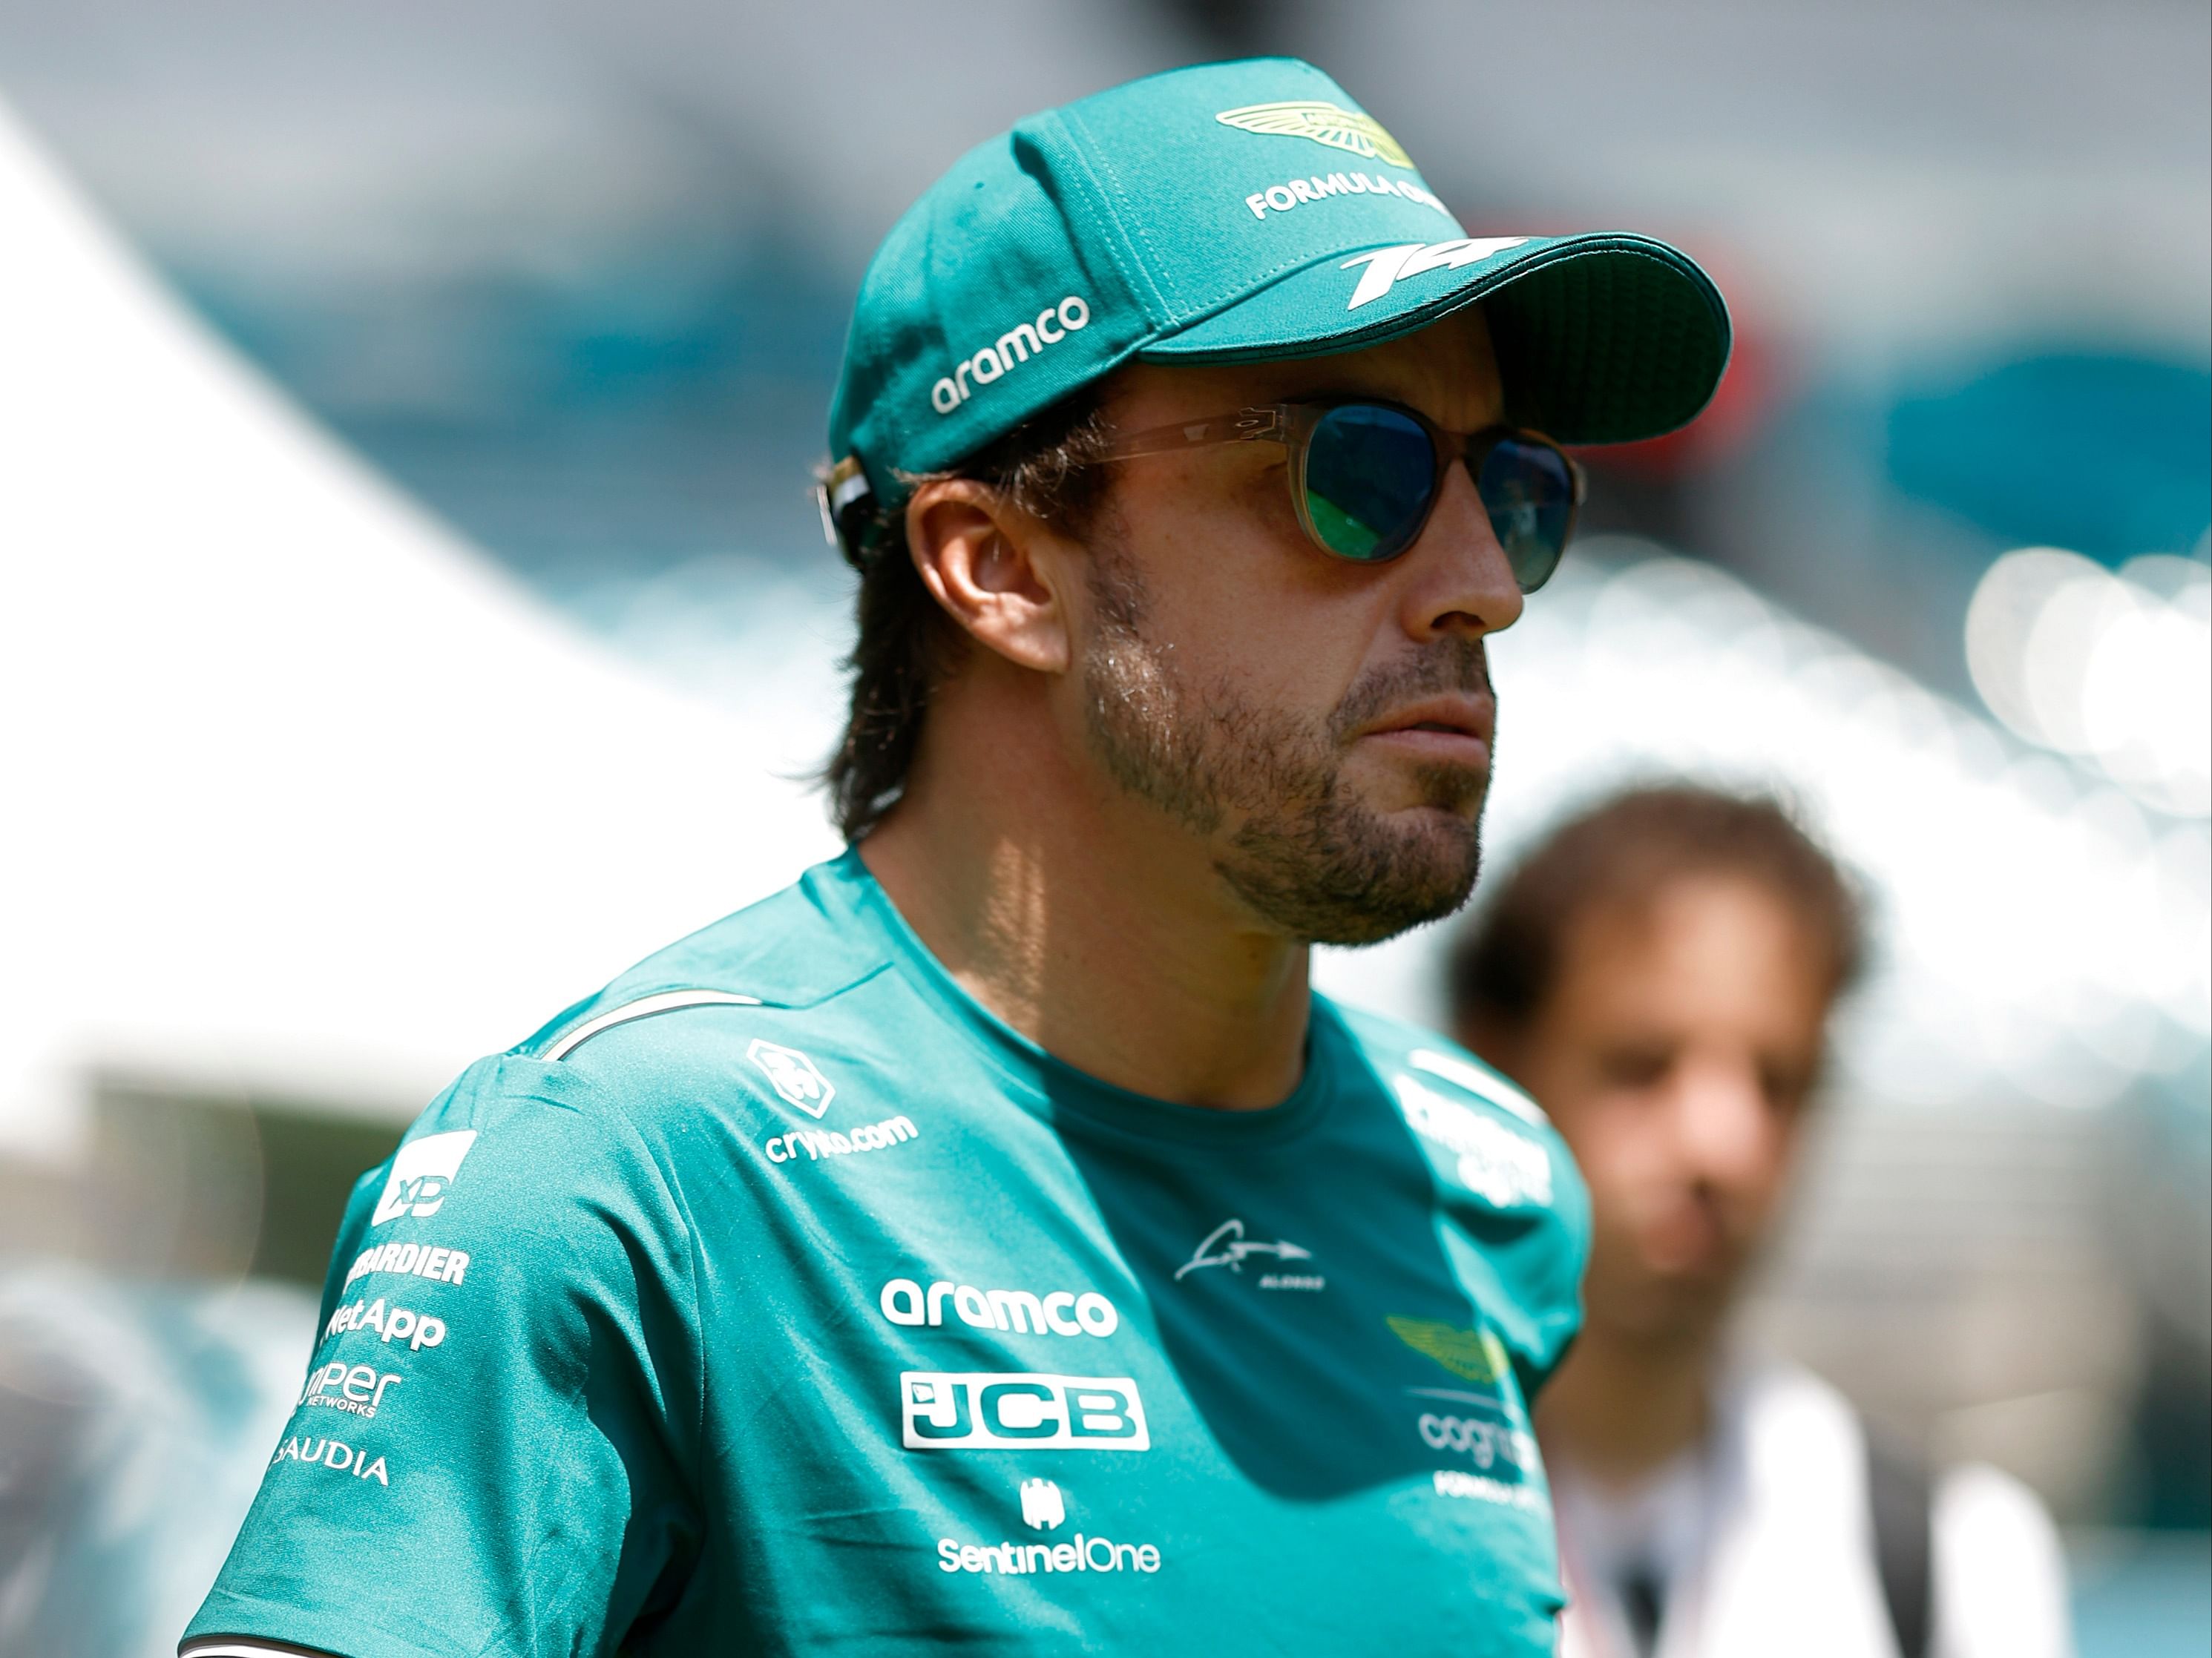 Fernando Alonso walks in the paddock prior to practice ahead of the 2023 F1 Miami Grand Prix. (Photo by Chris Graythen/Getty Images)